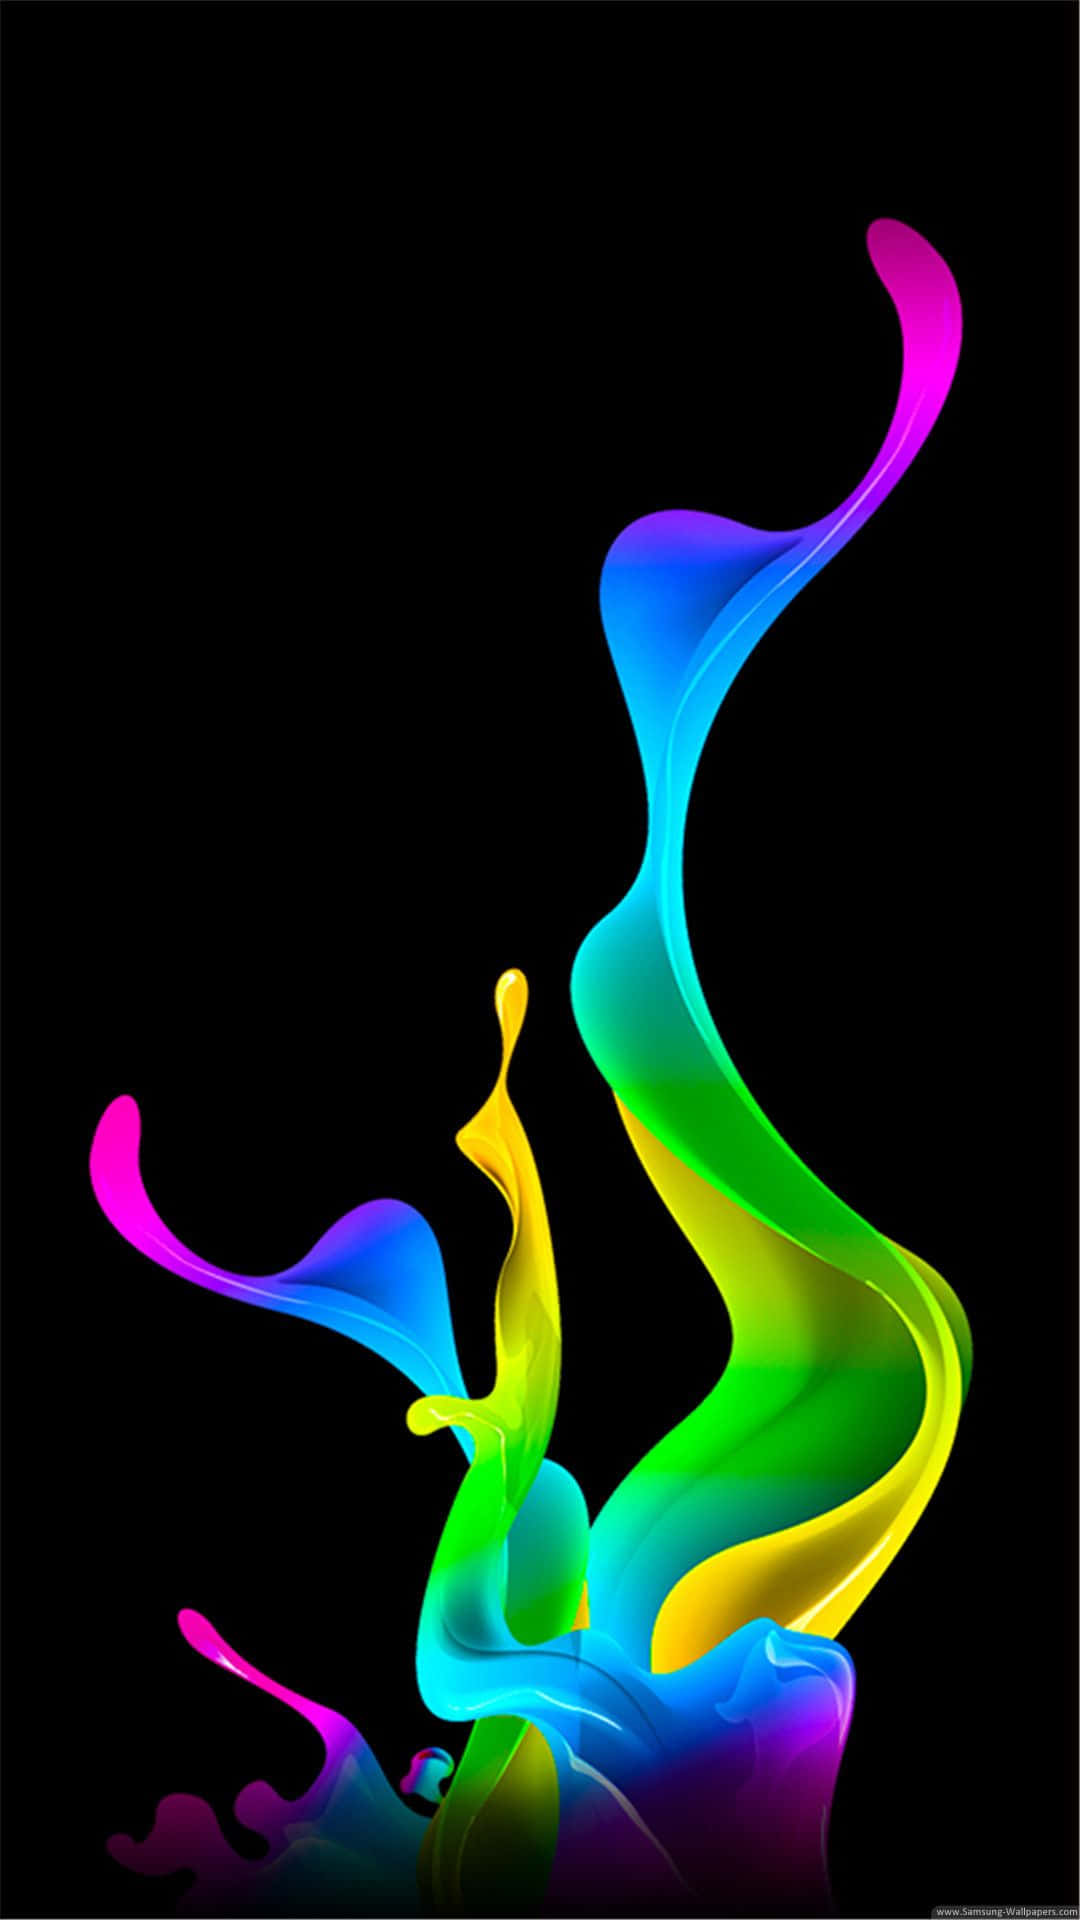 A Colorful Liquid Is Flowing On Black Background